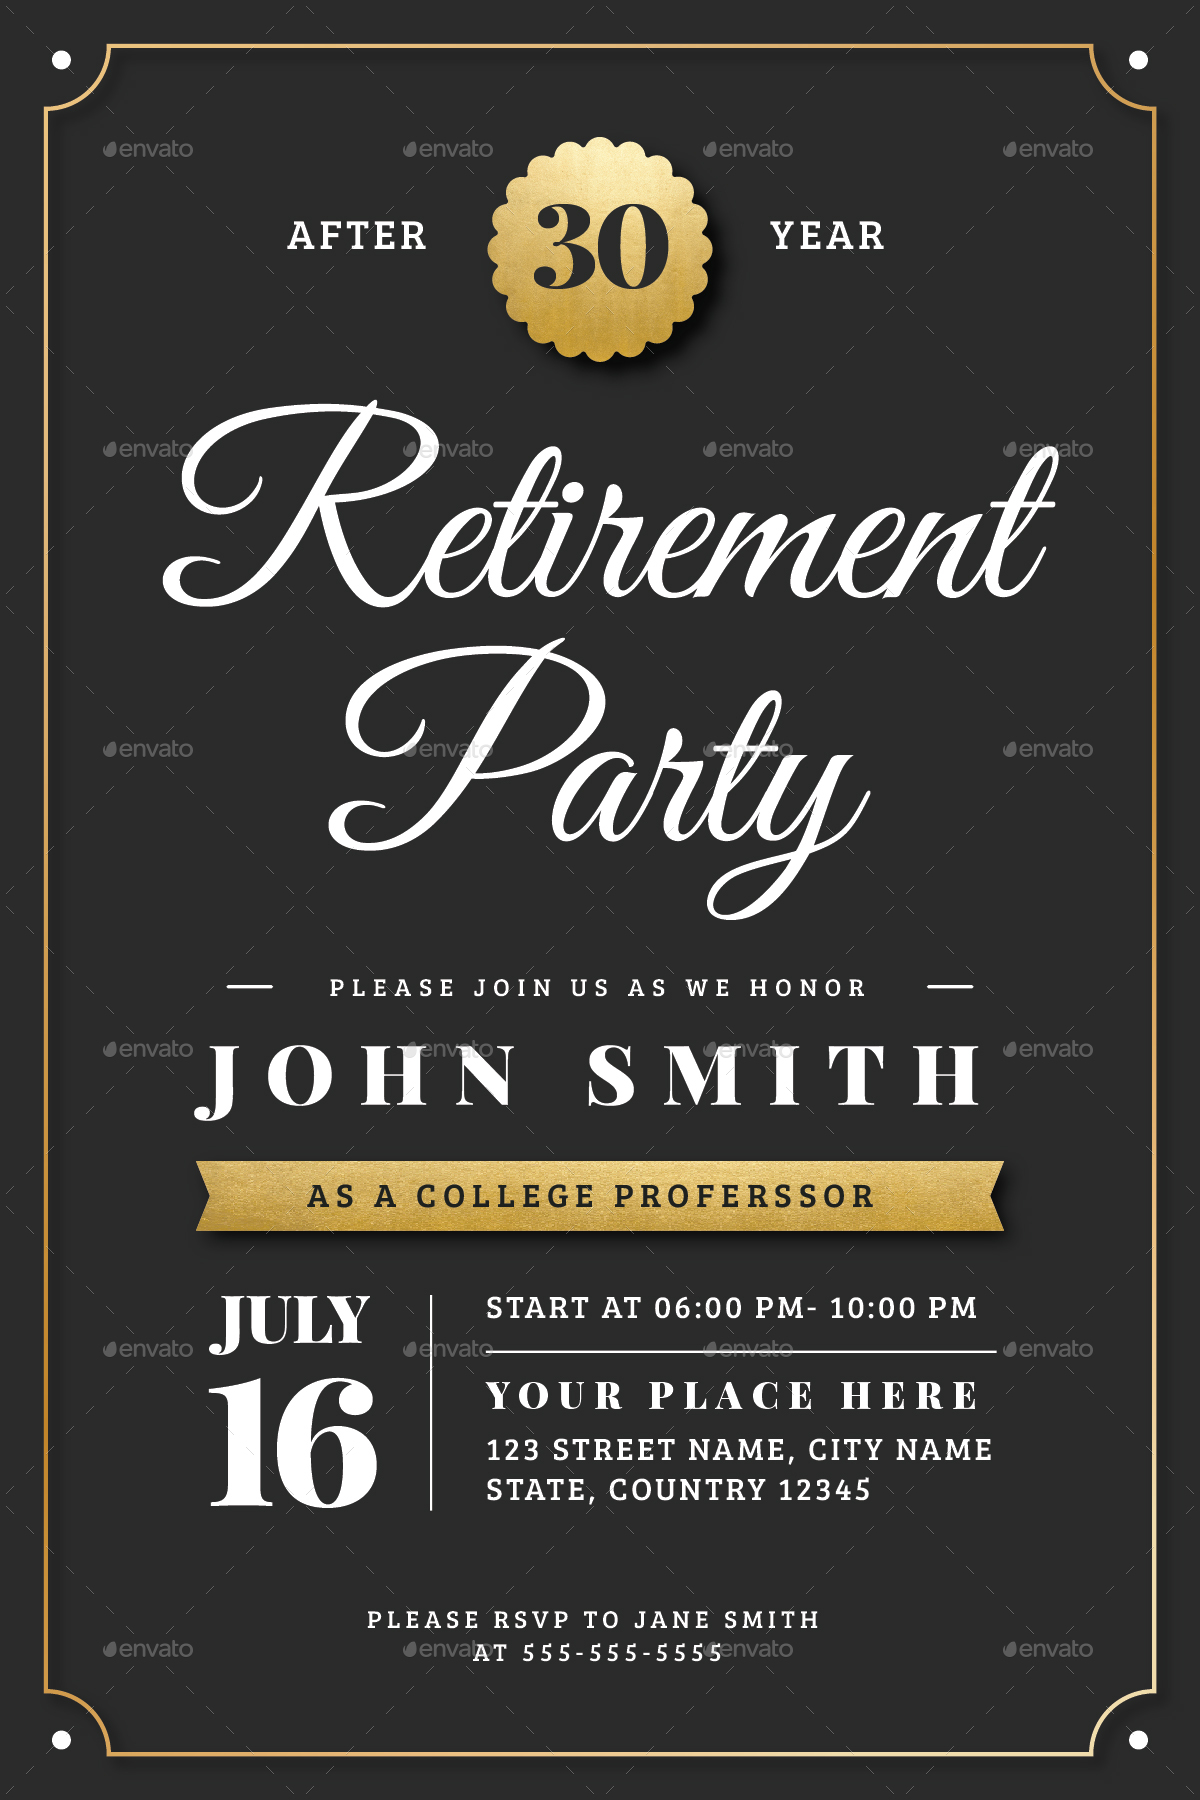 Gold Retirement Invitation Flyer Templates by Vector_Vactory GraphicRiver